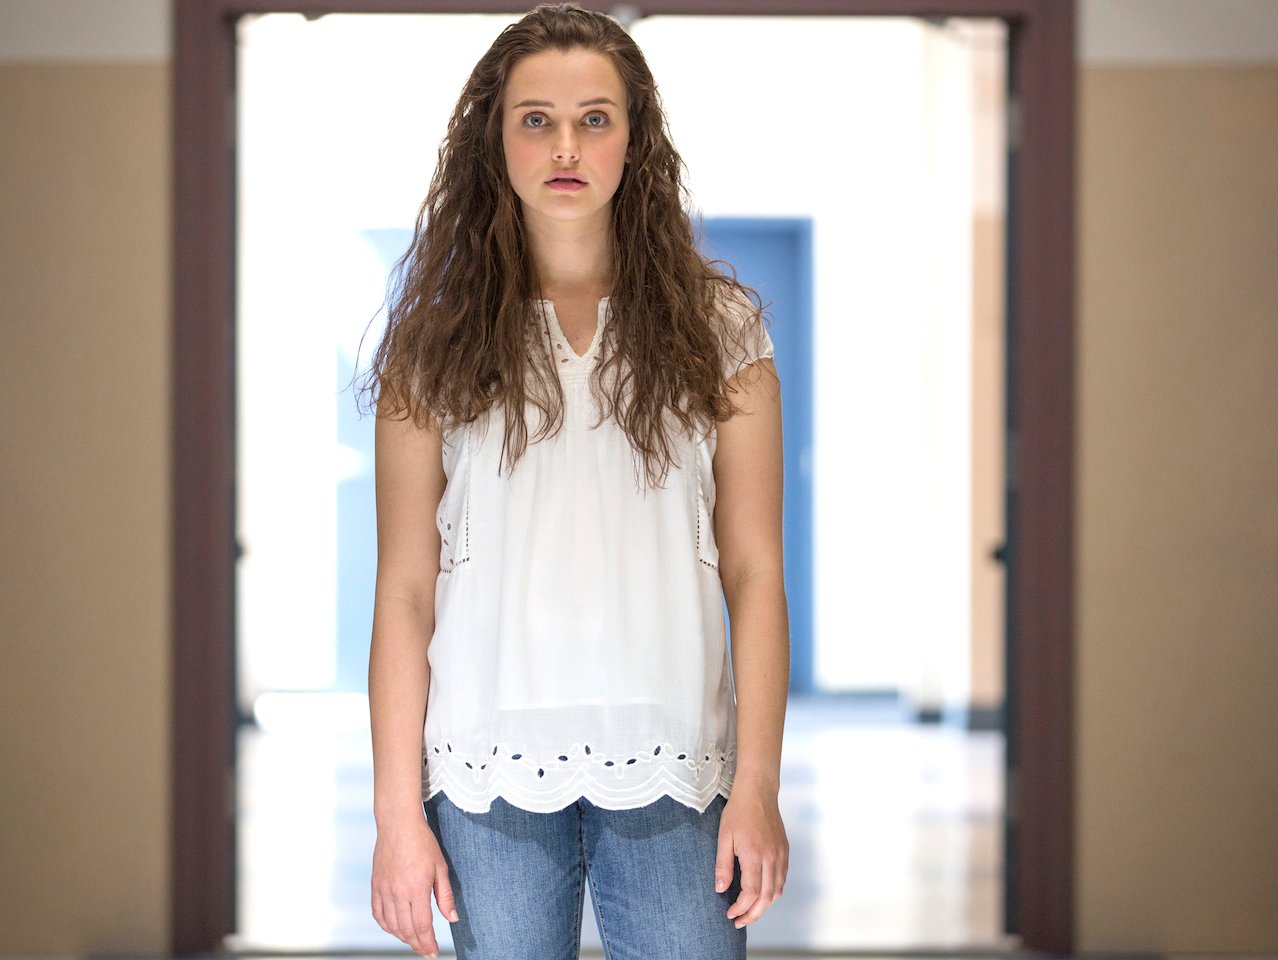 Some Canadian schools are banning 13 reasons why